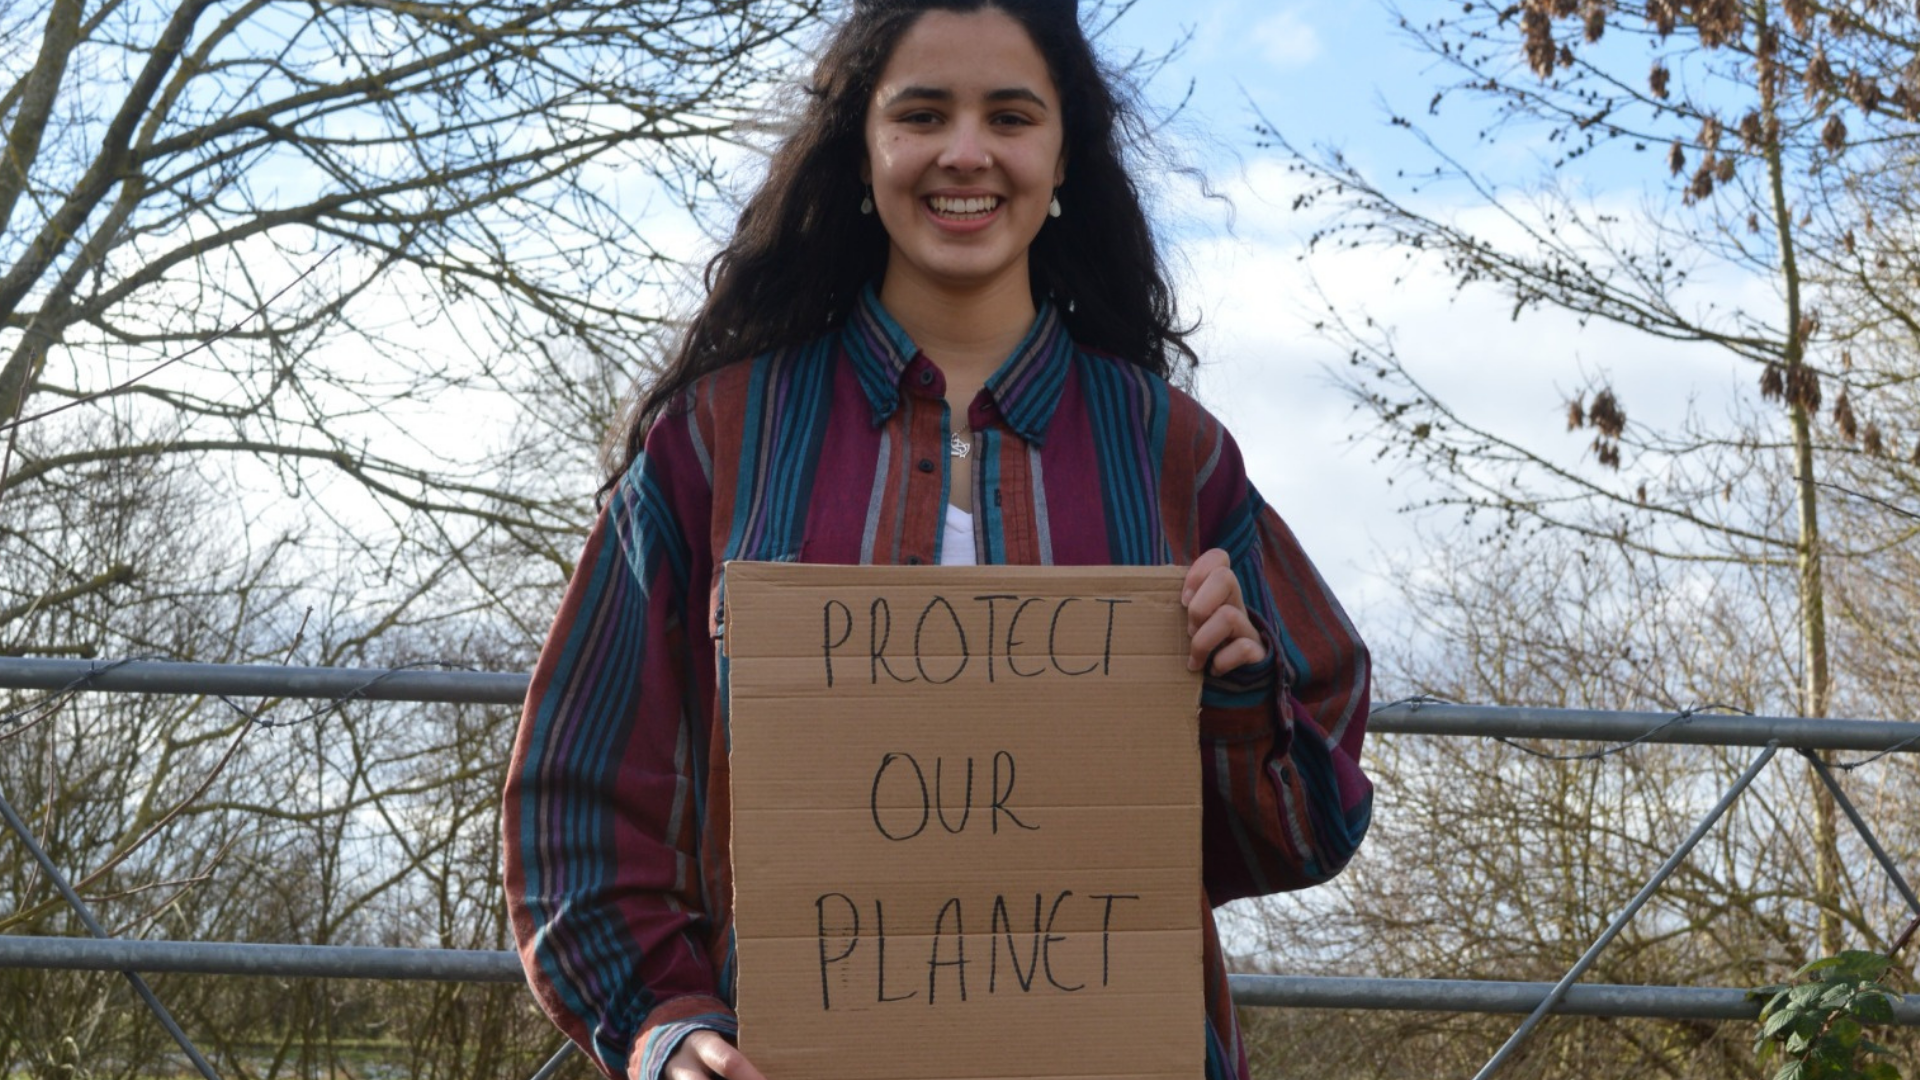 Shanti doesn't believe her church is doing enough to tackle the climate emergency.